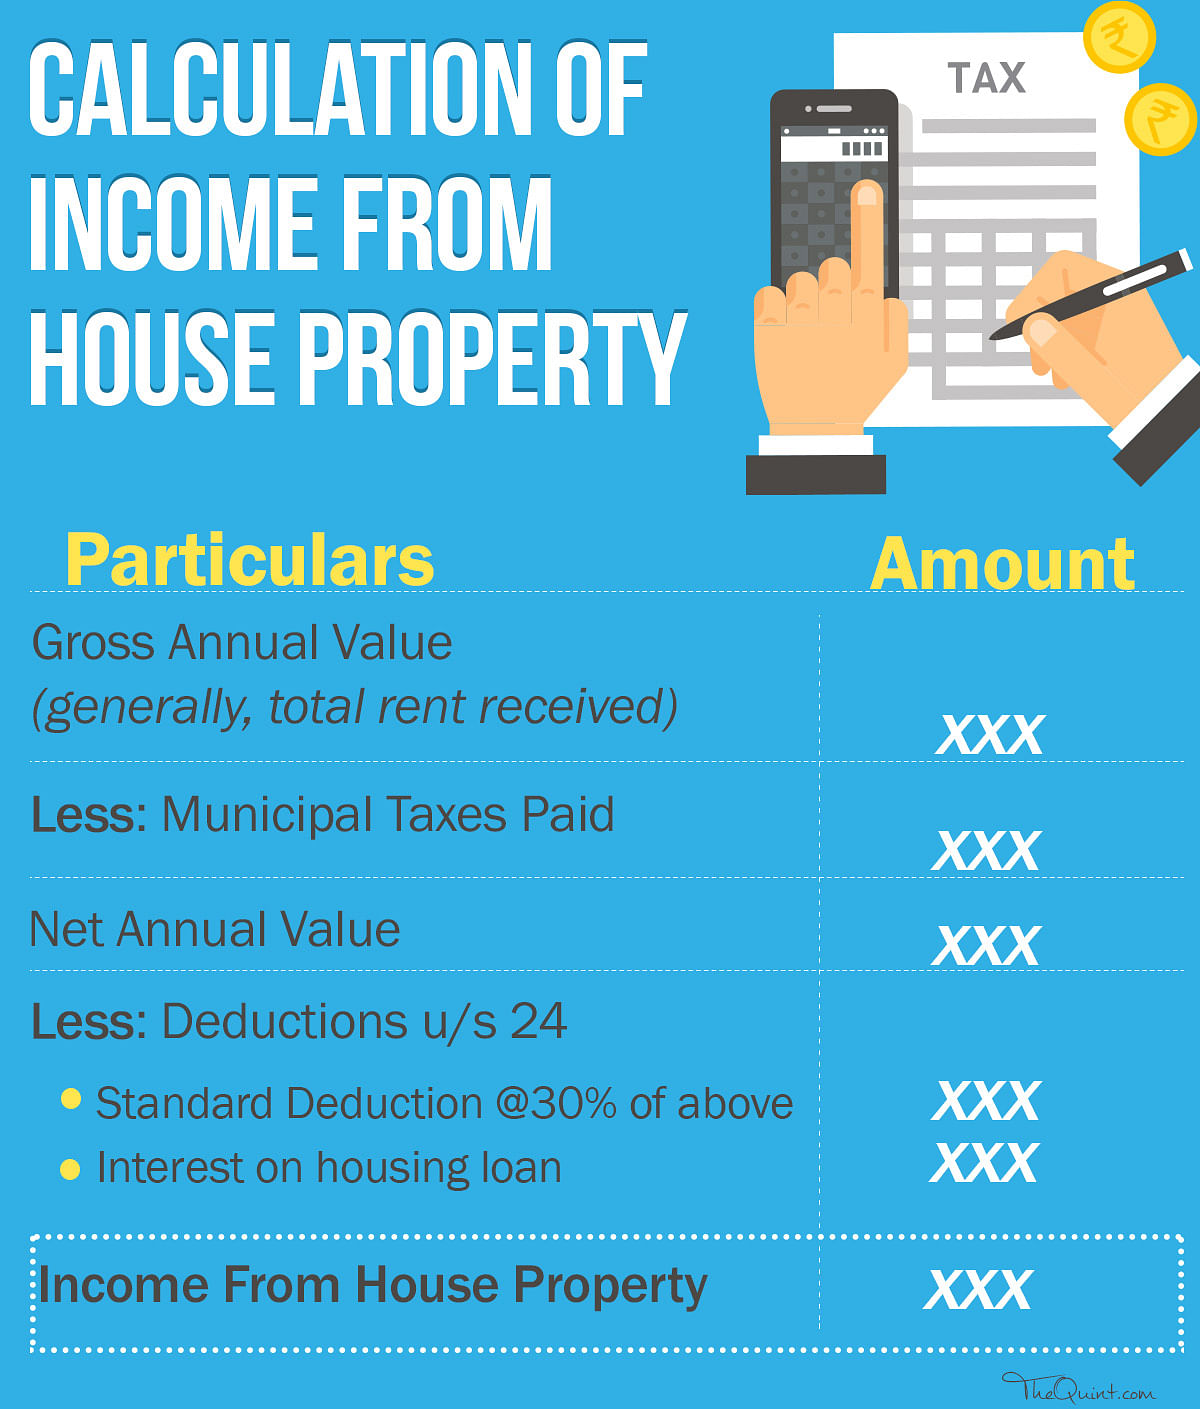 Proper tax planning can help save tax on rental income, that is the largest source of income after salary.